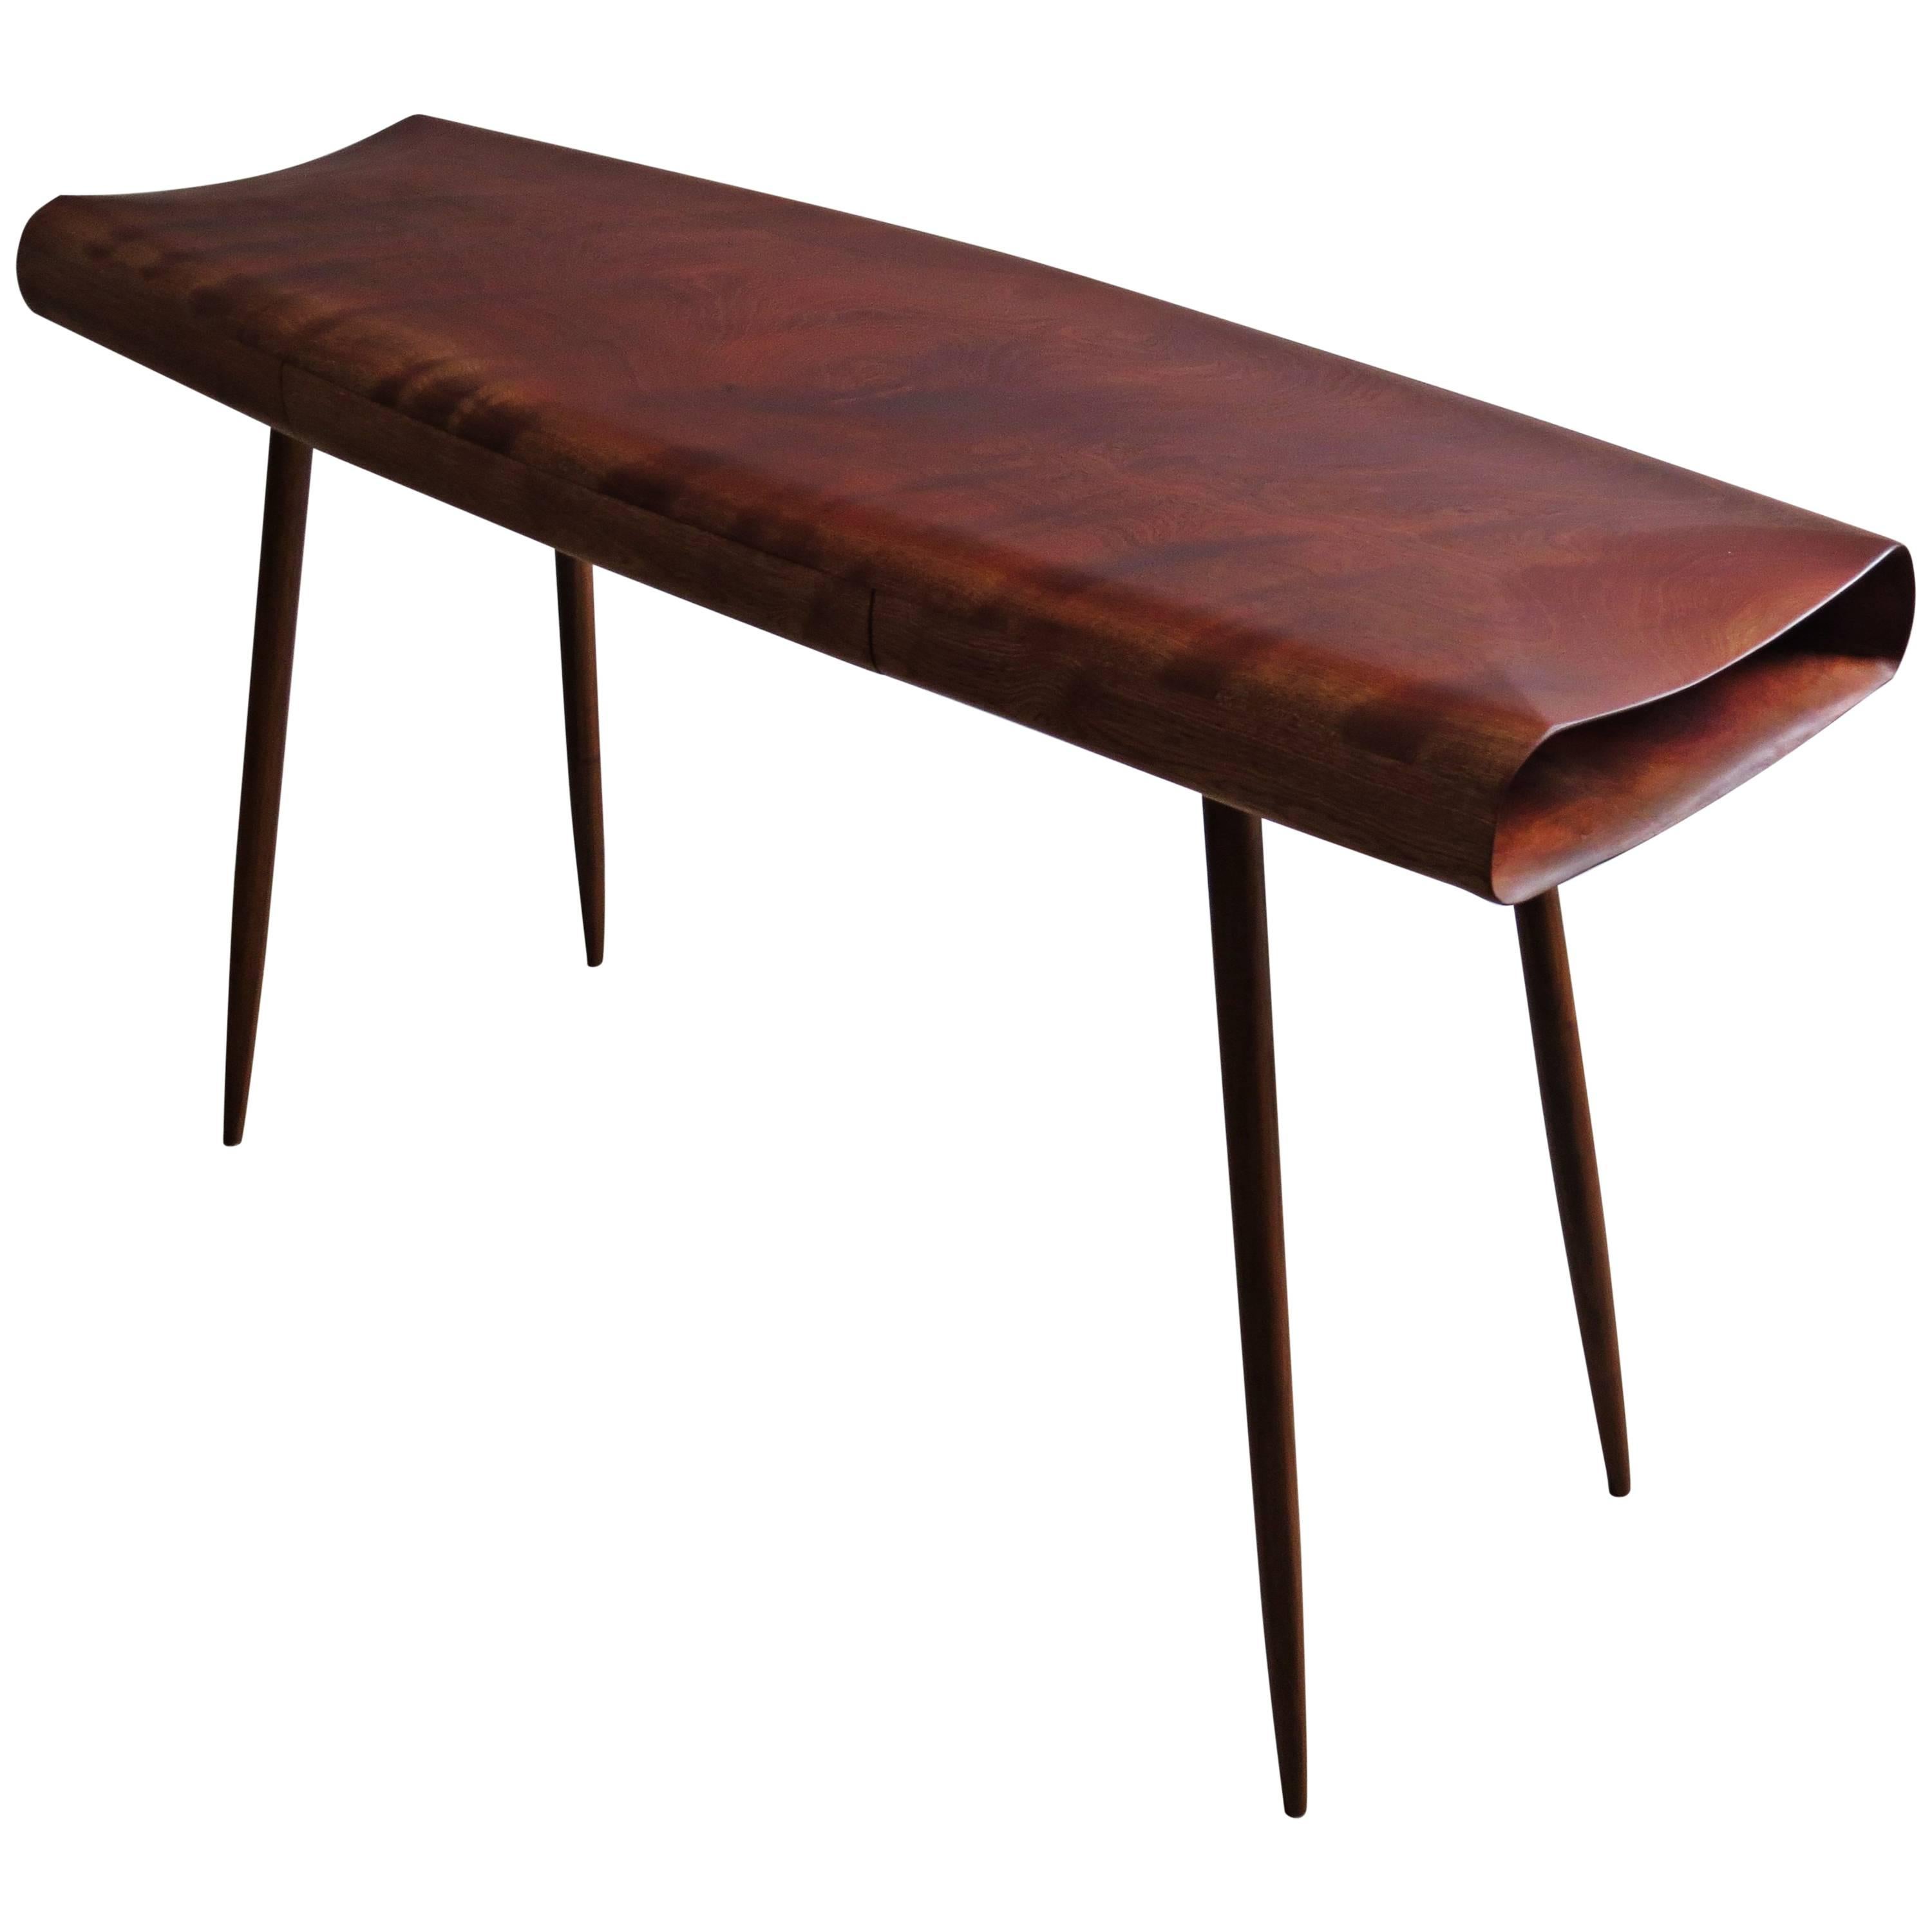 Desk or Console Handmade in Organic Design solid wood